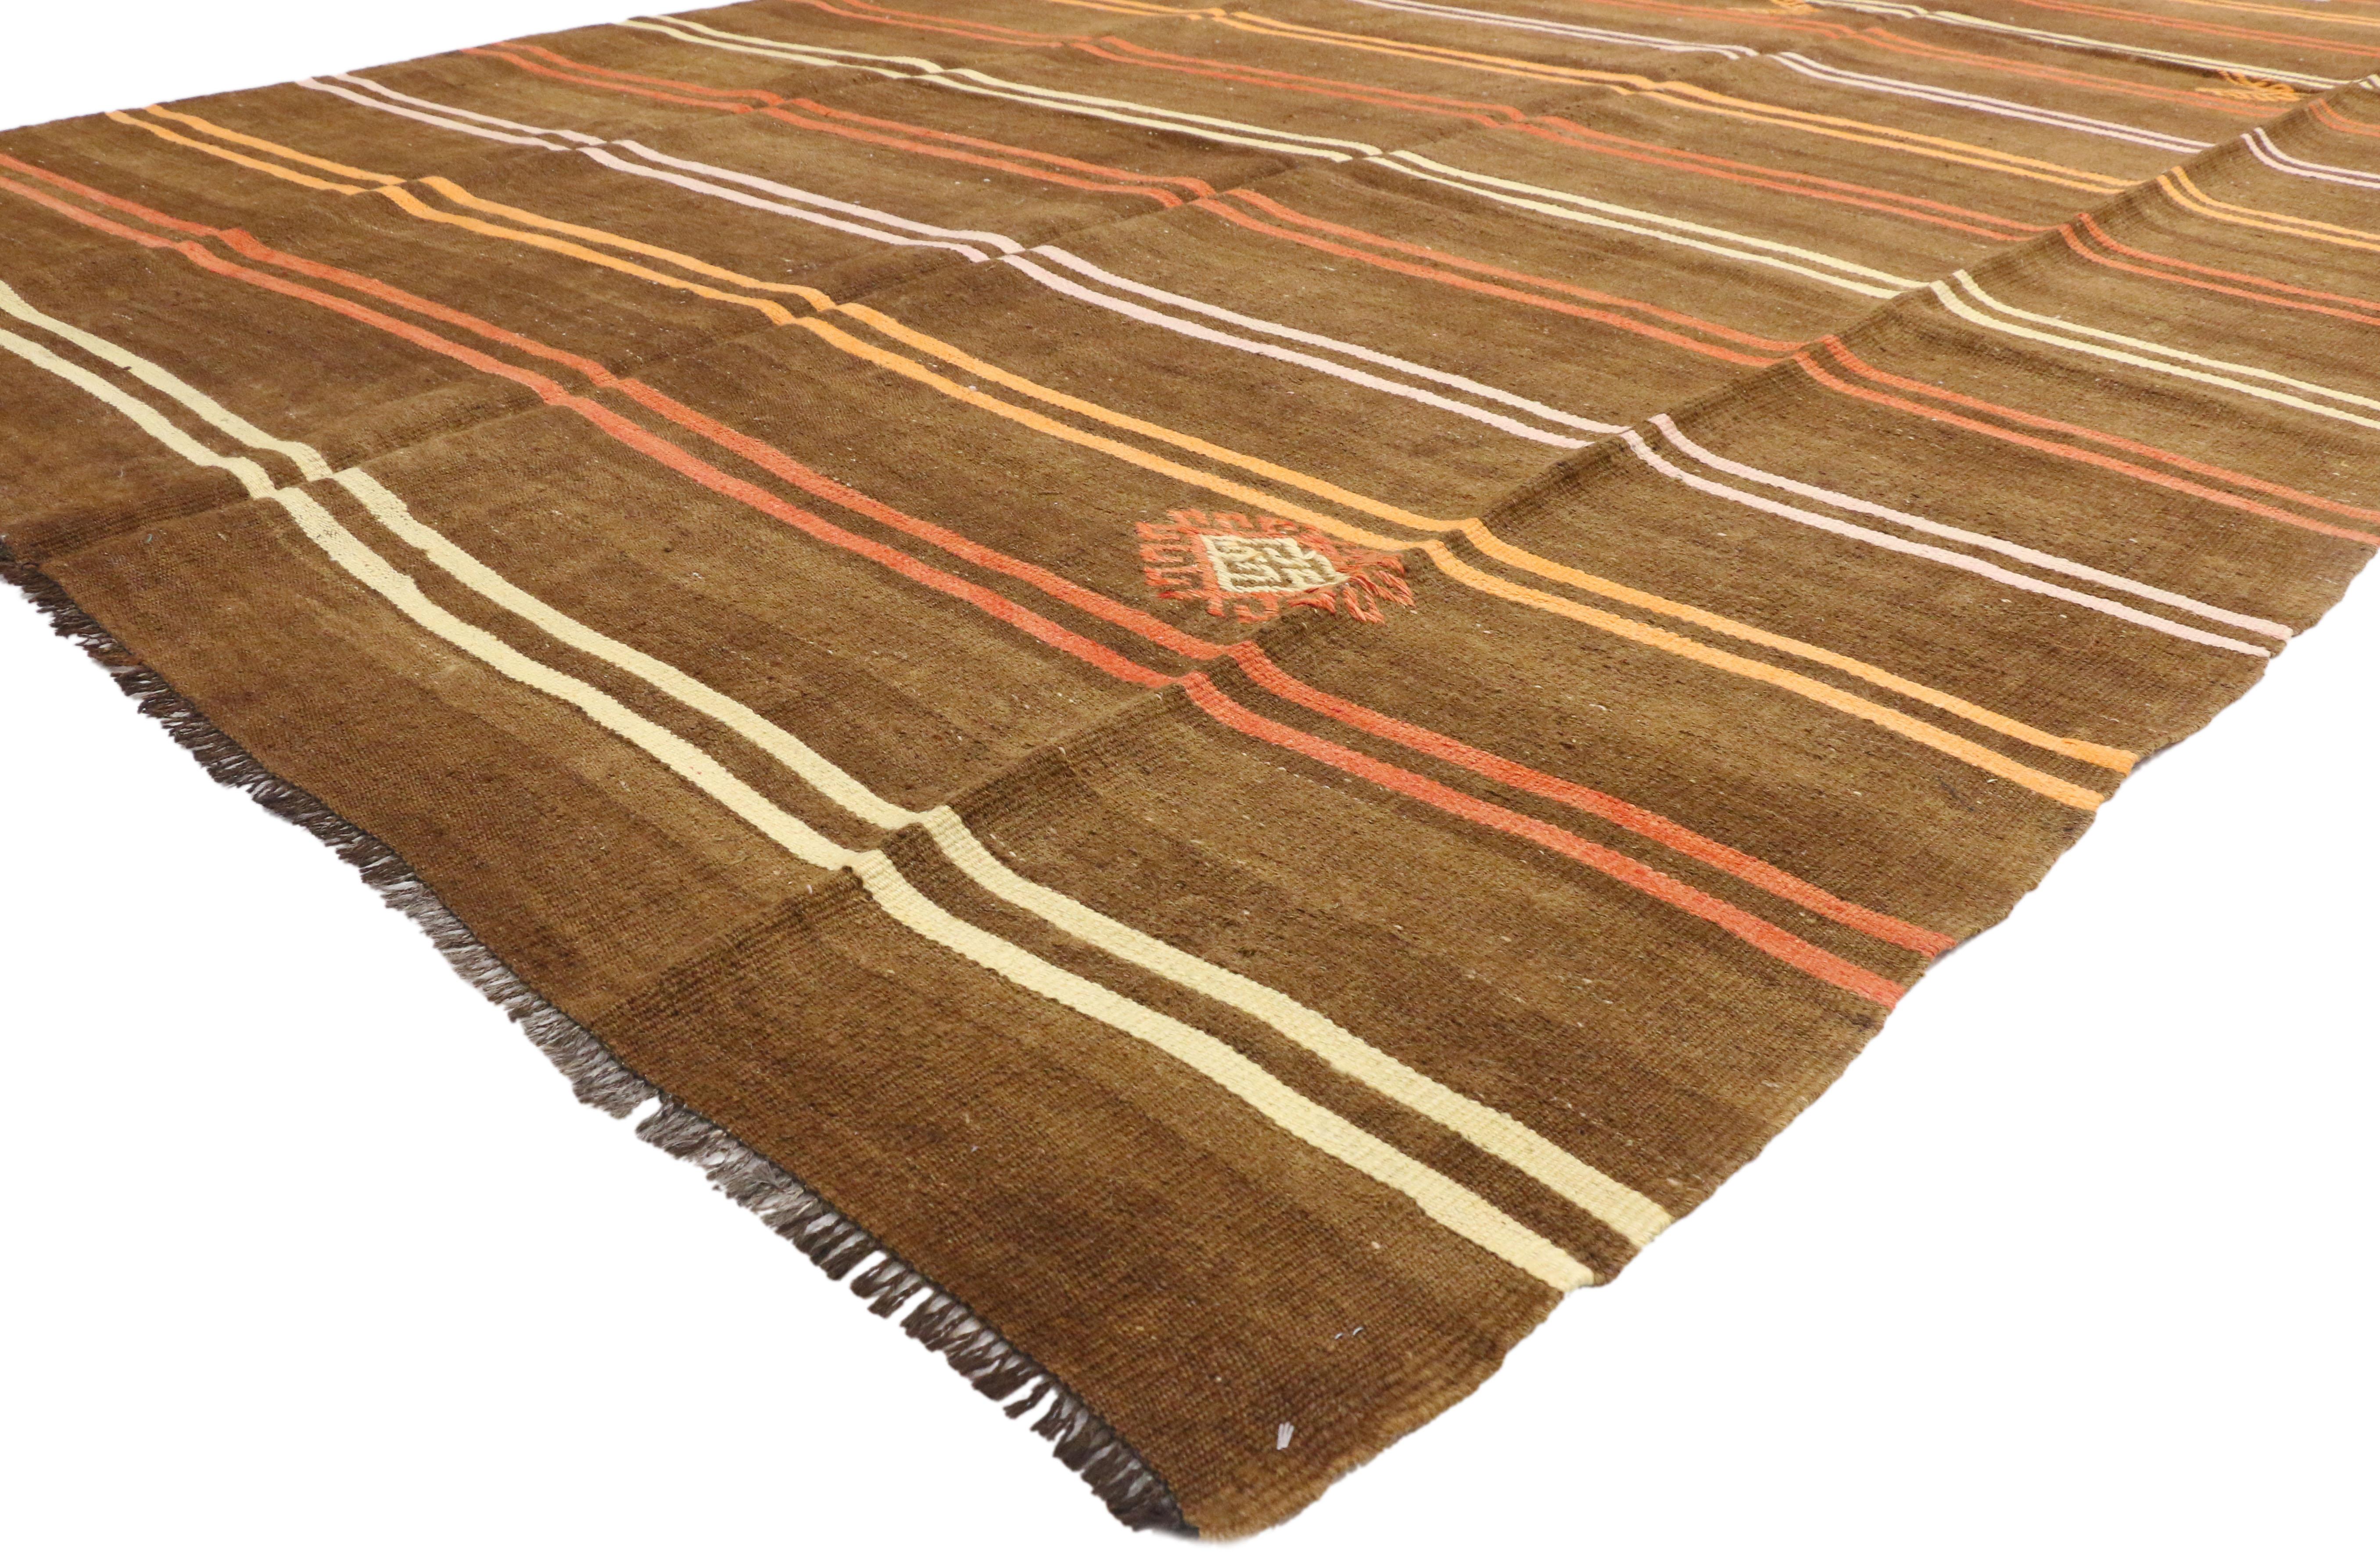 51076 Vintage Turkish Kilim Rug with Bohemian Tribal Design and Modern Cabin Style. Create a comfortable and modern setting with this hand-woven wool vintage Turkish Kilim rug. The flat-weave kilim rug features symbolic tribal motifs and vibrant